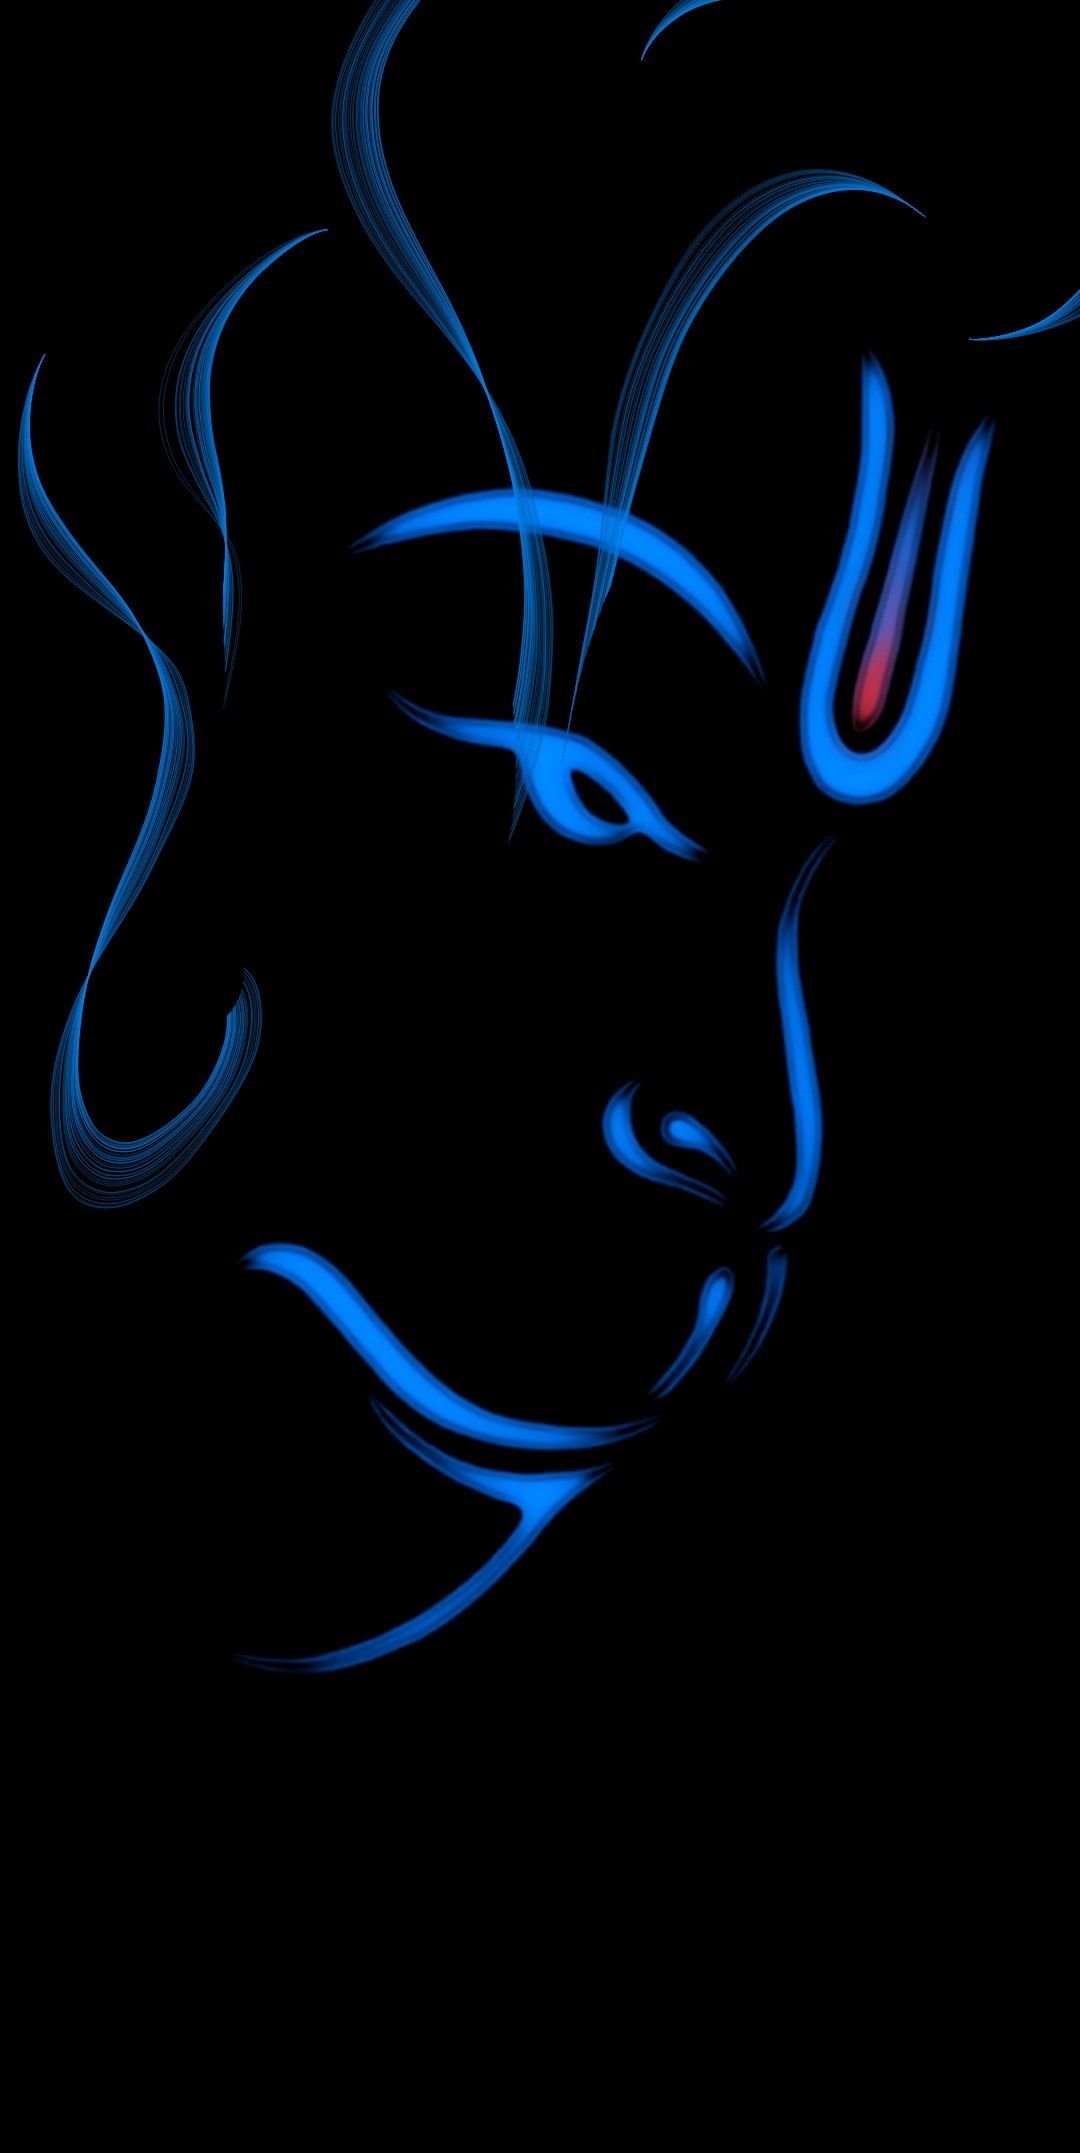 Blueface Wallpaper HD APK (Android App) - Free Download